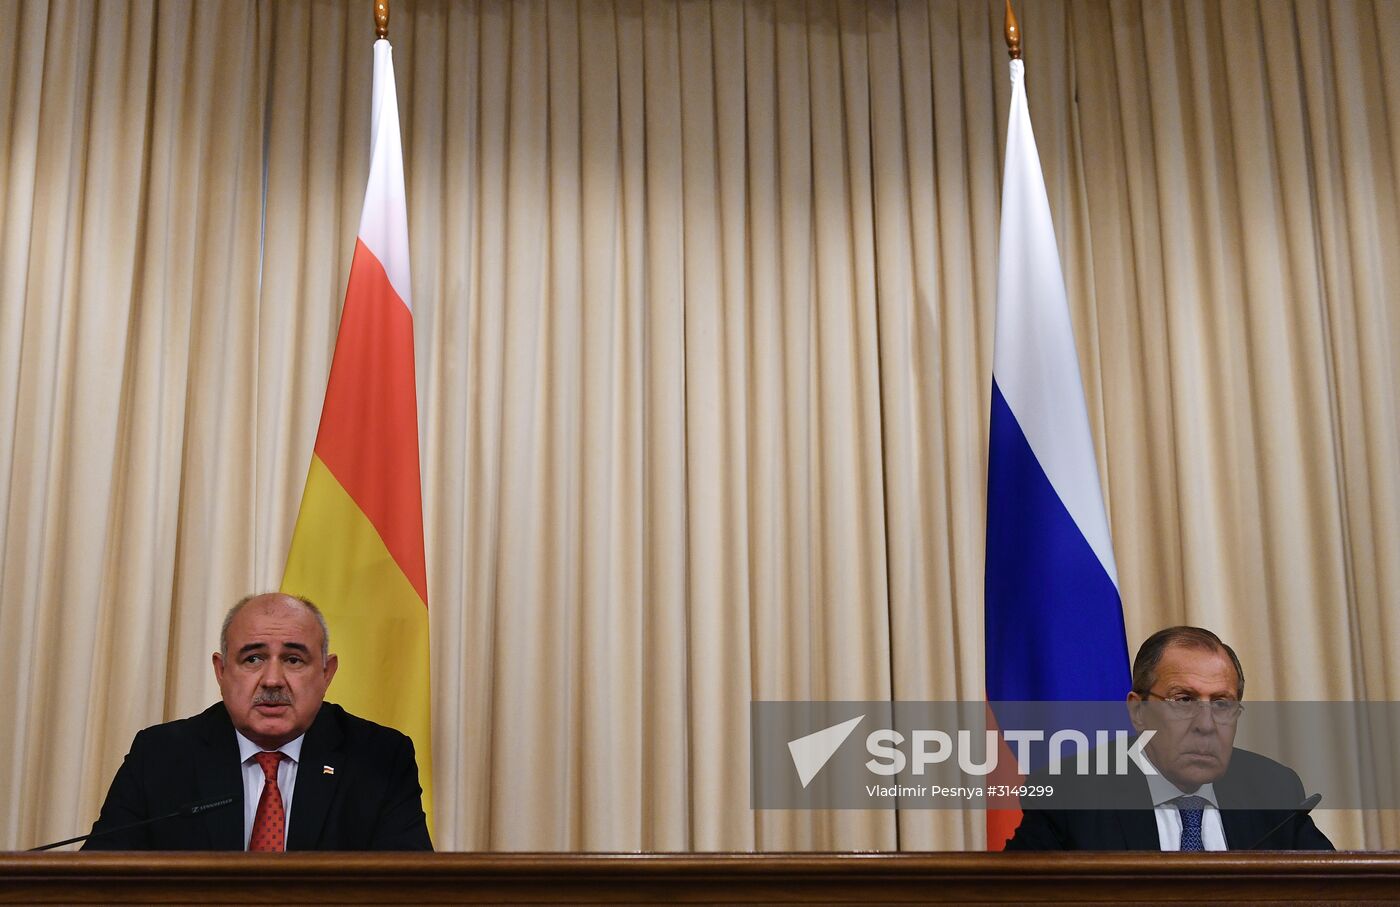 Foreign Ministers Sergei Lavrov of Russia and Dmitry Medoev of South Ossetia meet in Moscow